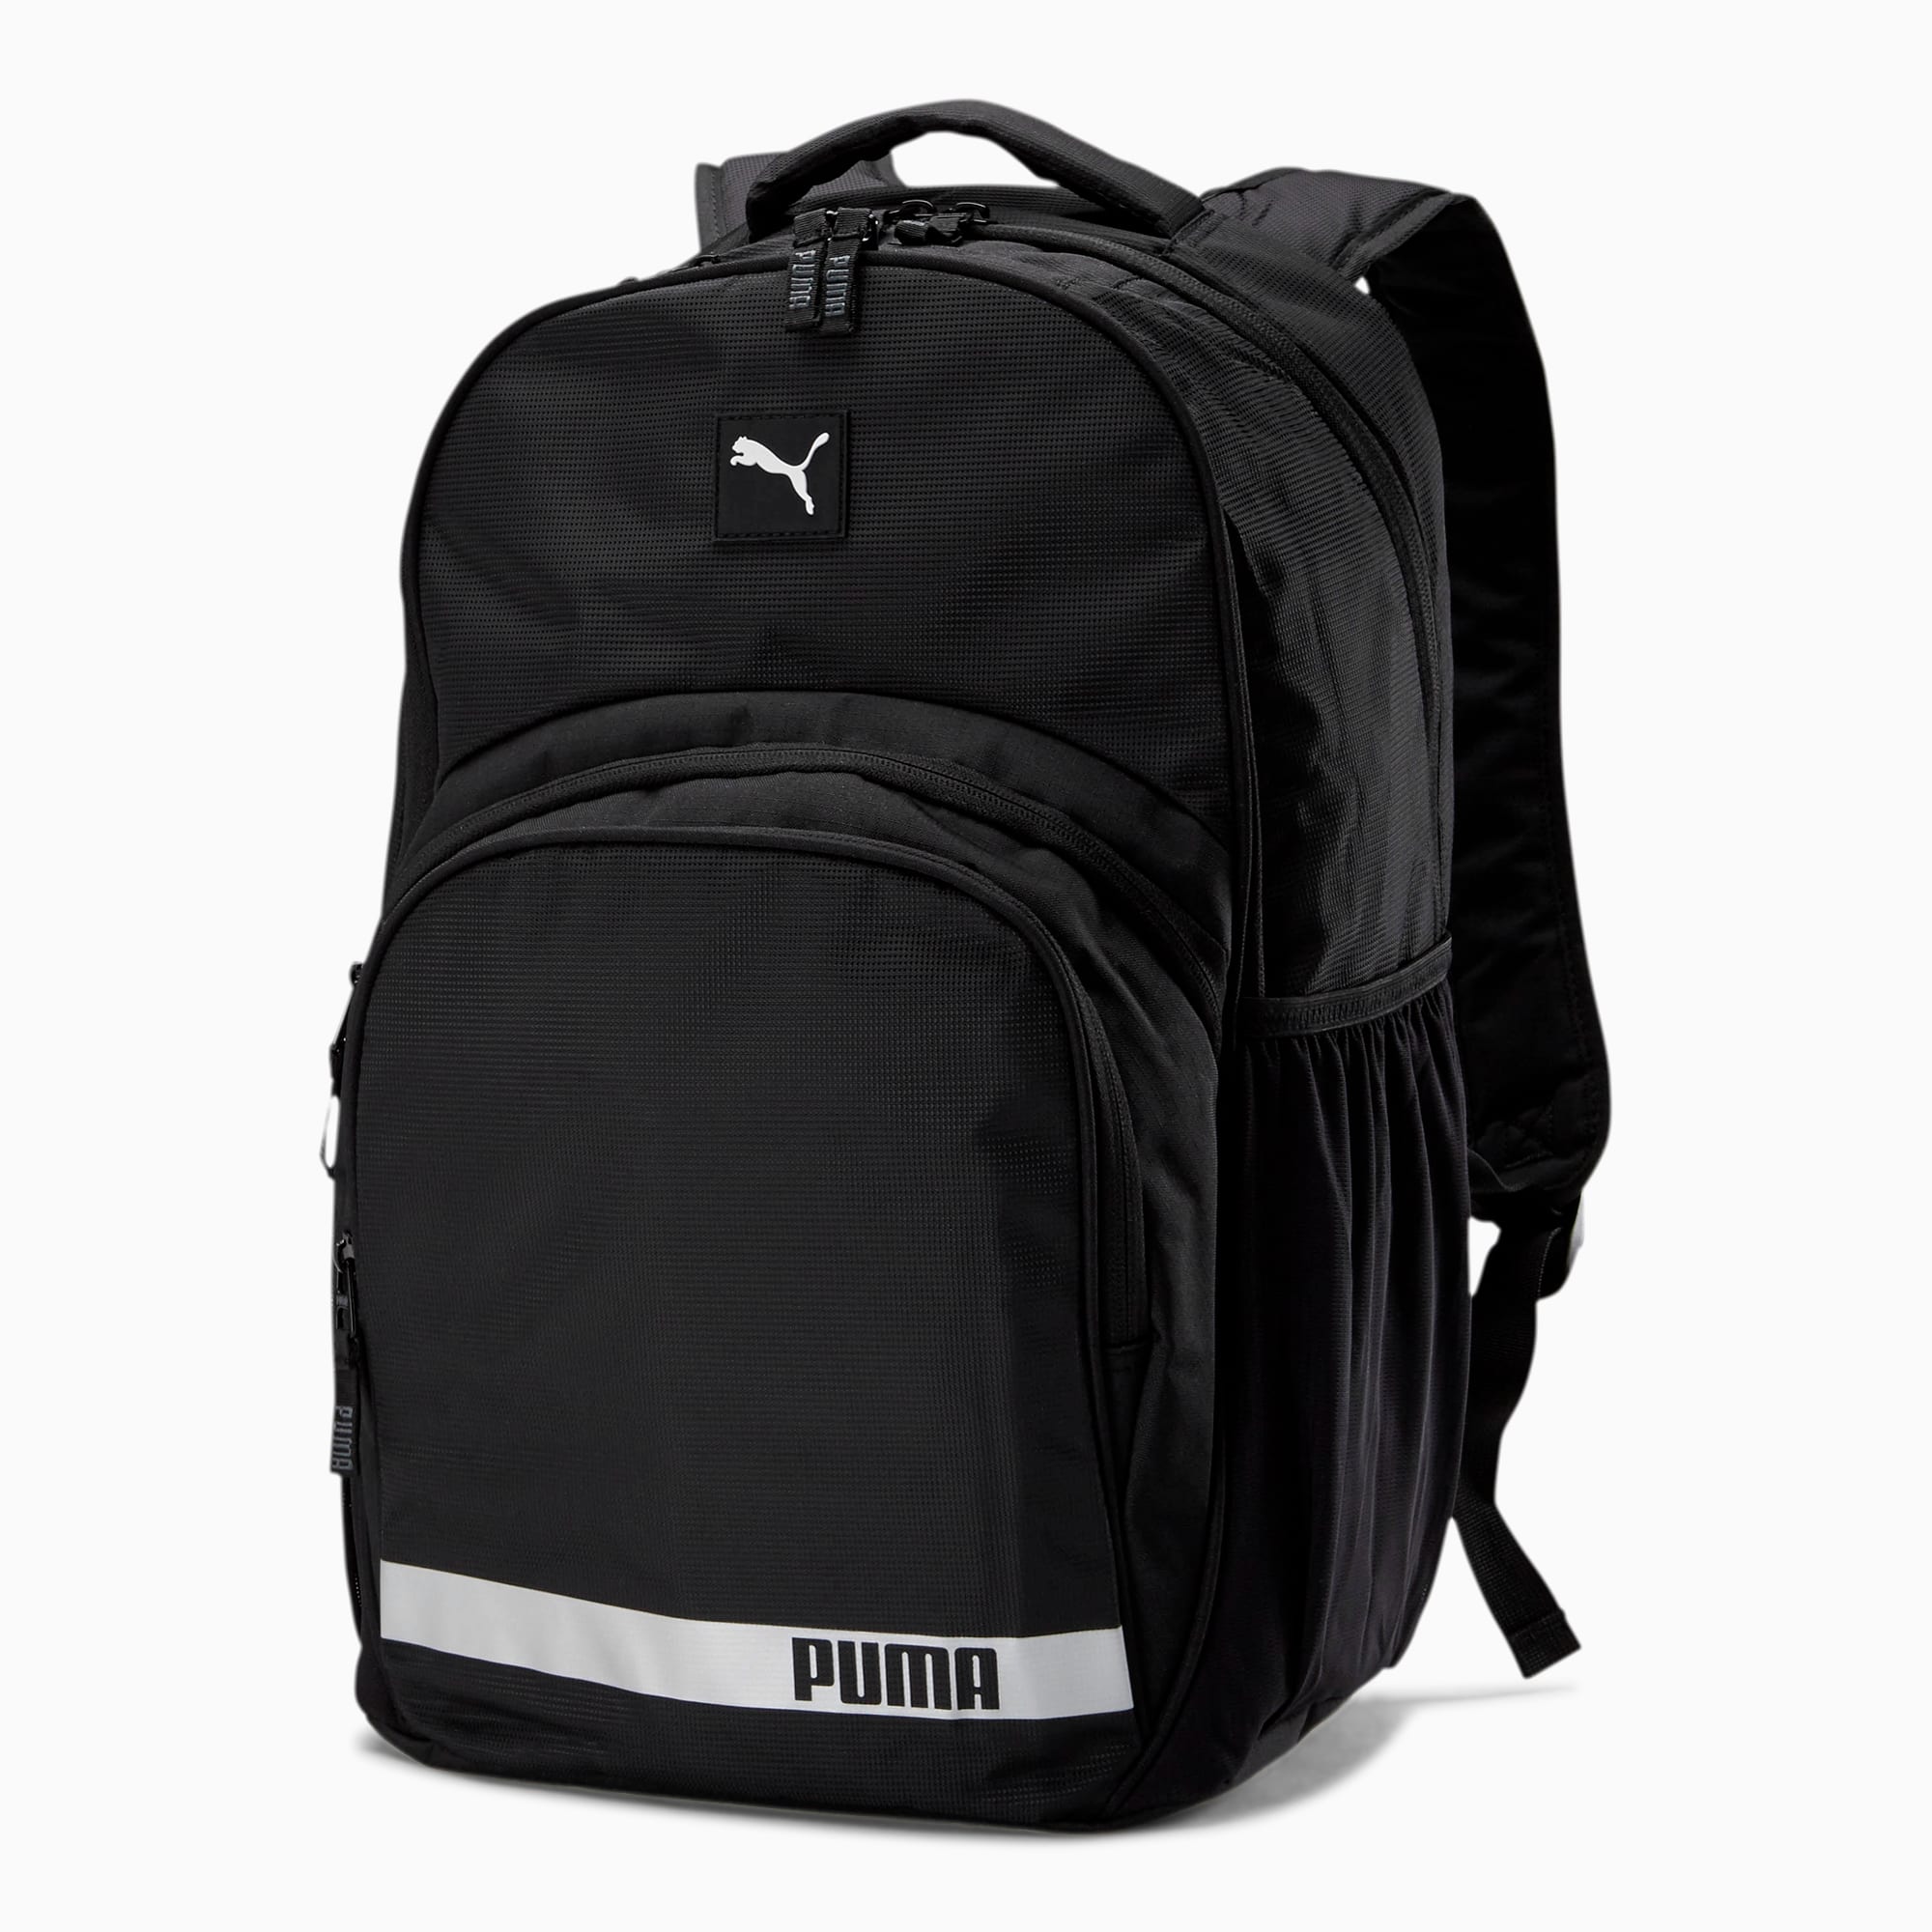 Formation 2.0 Ball Backpack | PUMA US